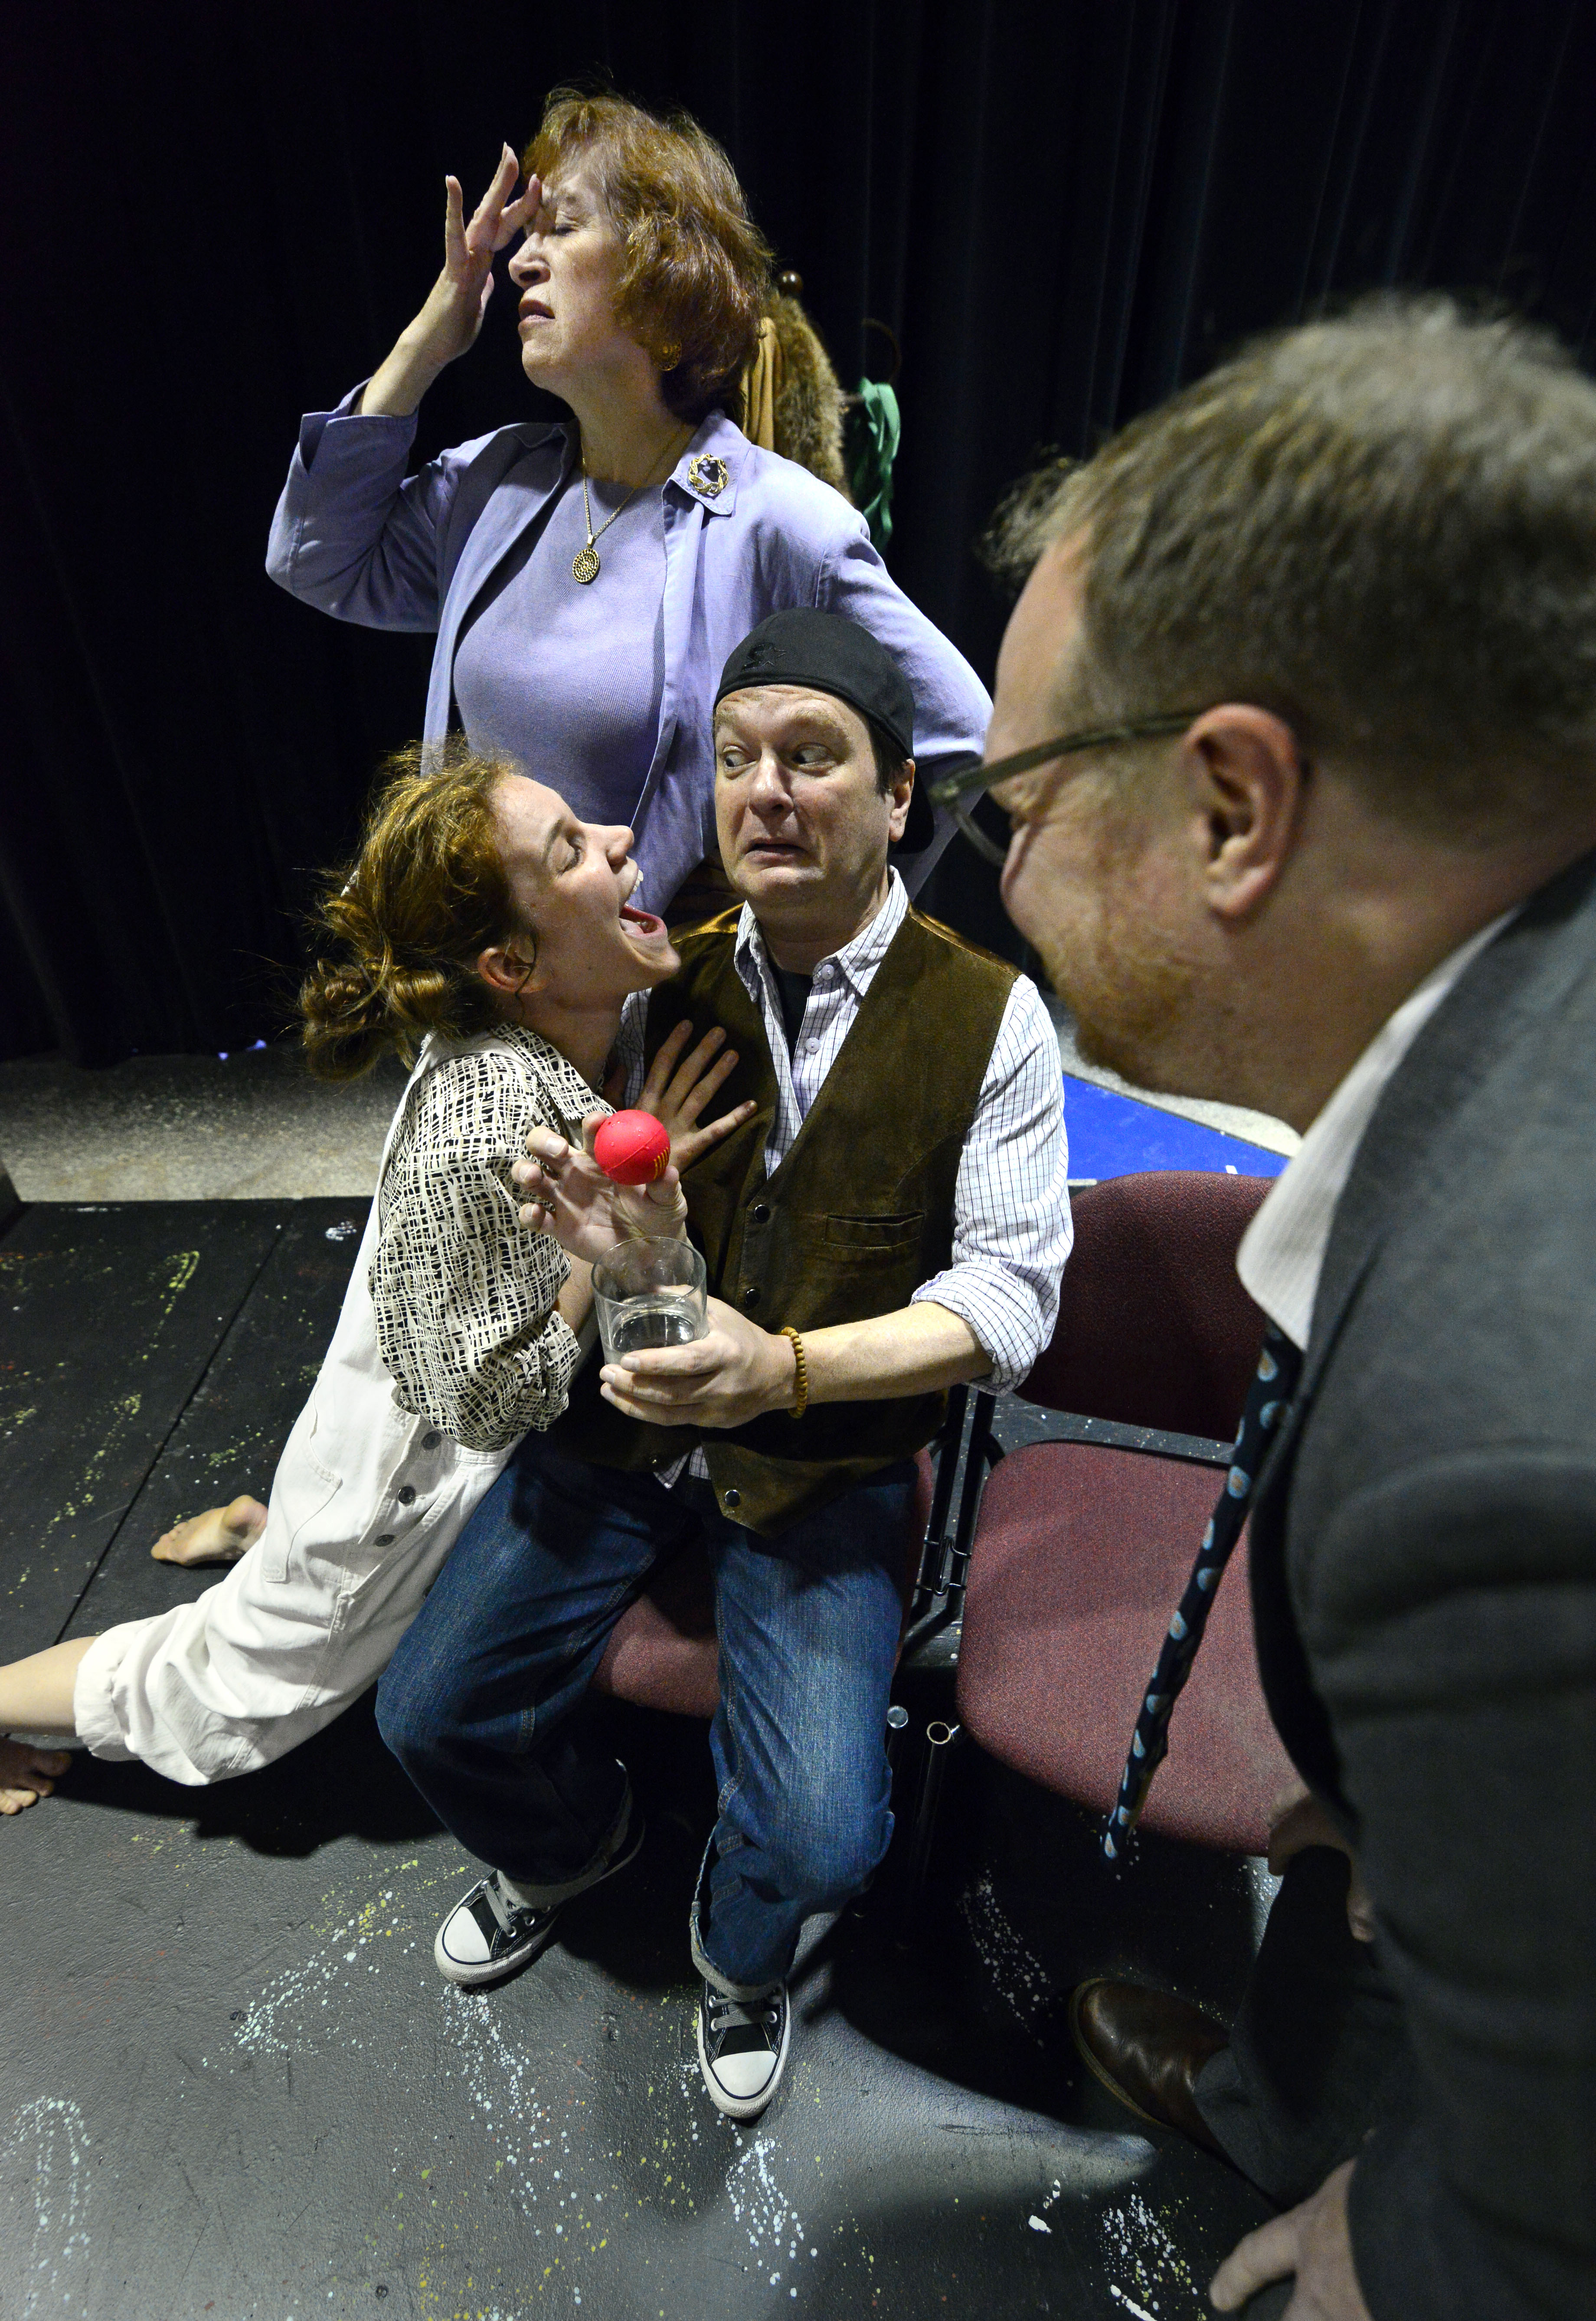 sylvia drops her ball - in Tom's drink!  photo by Stefan Hard, the times argus